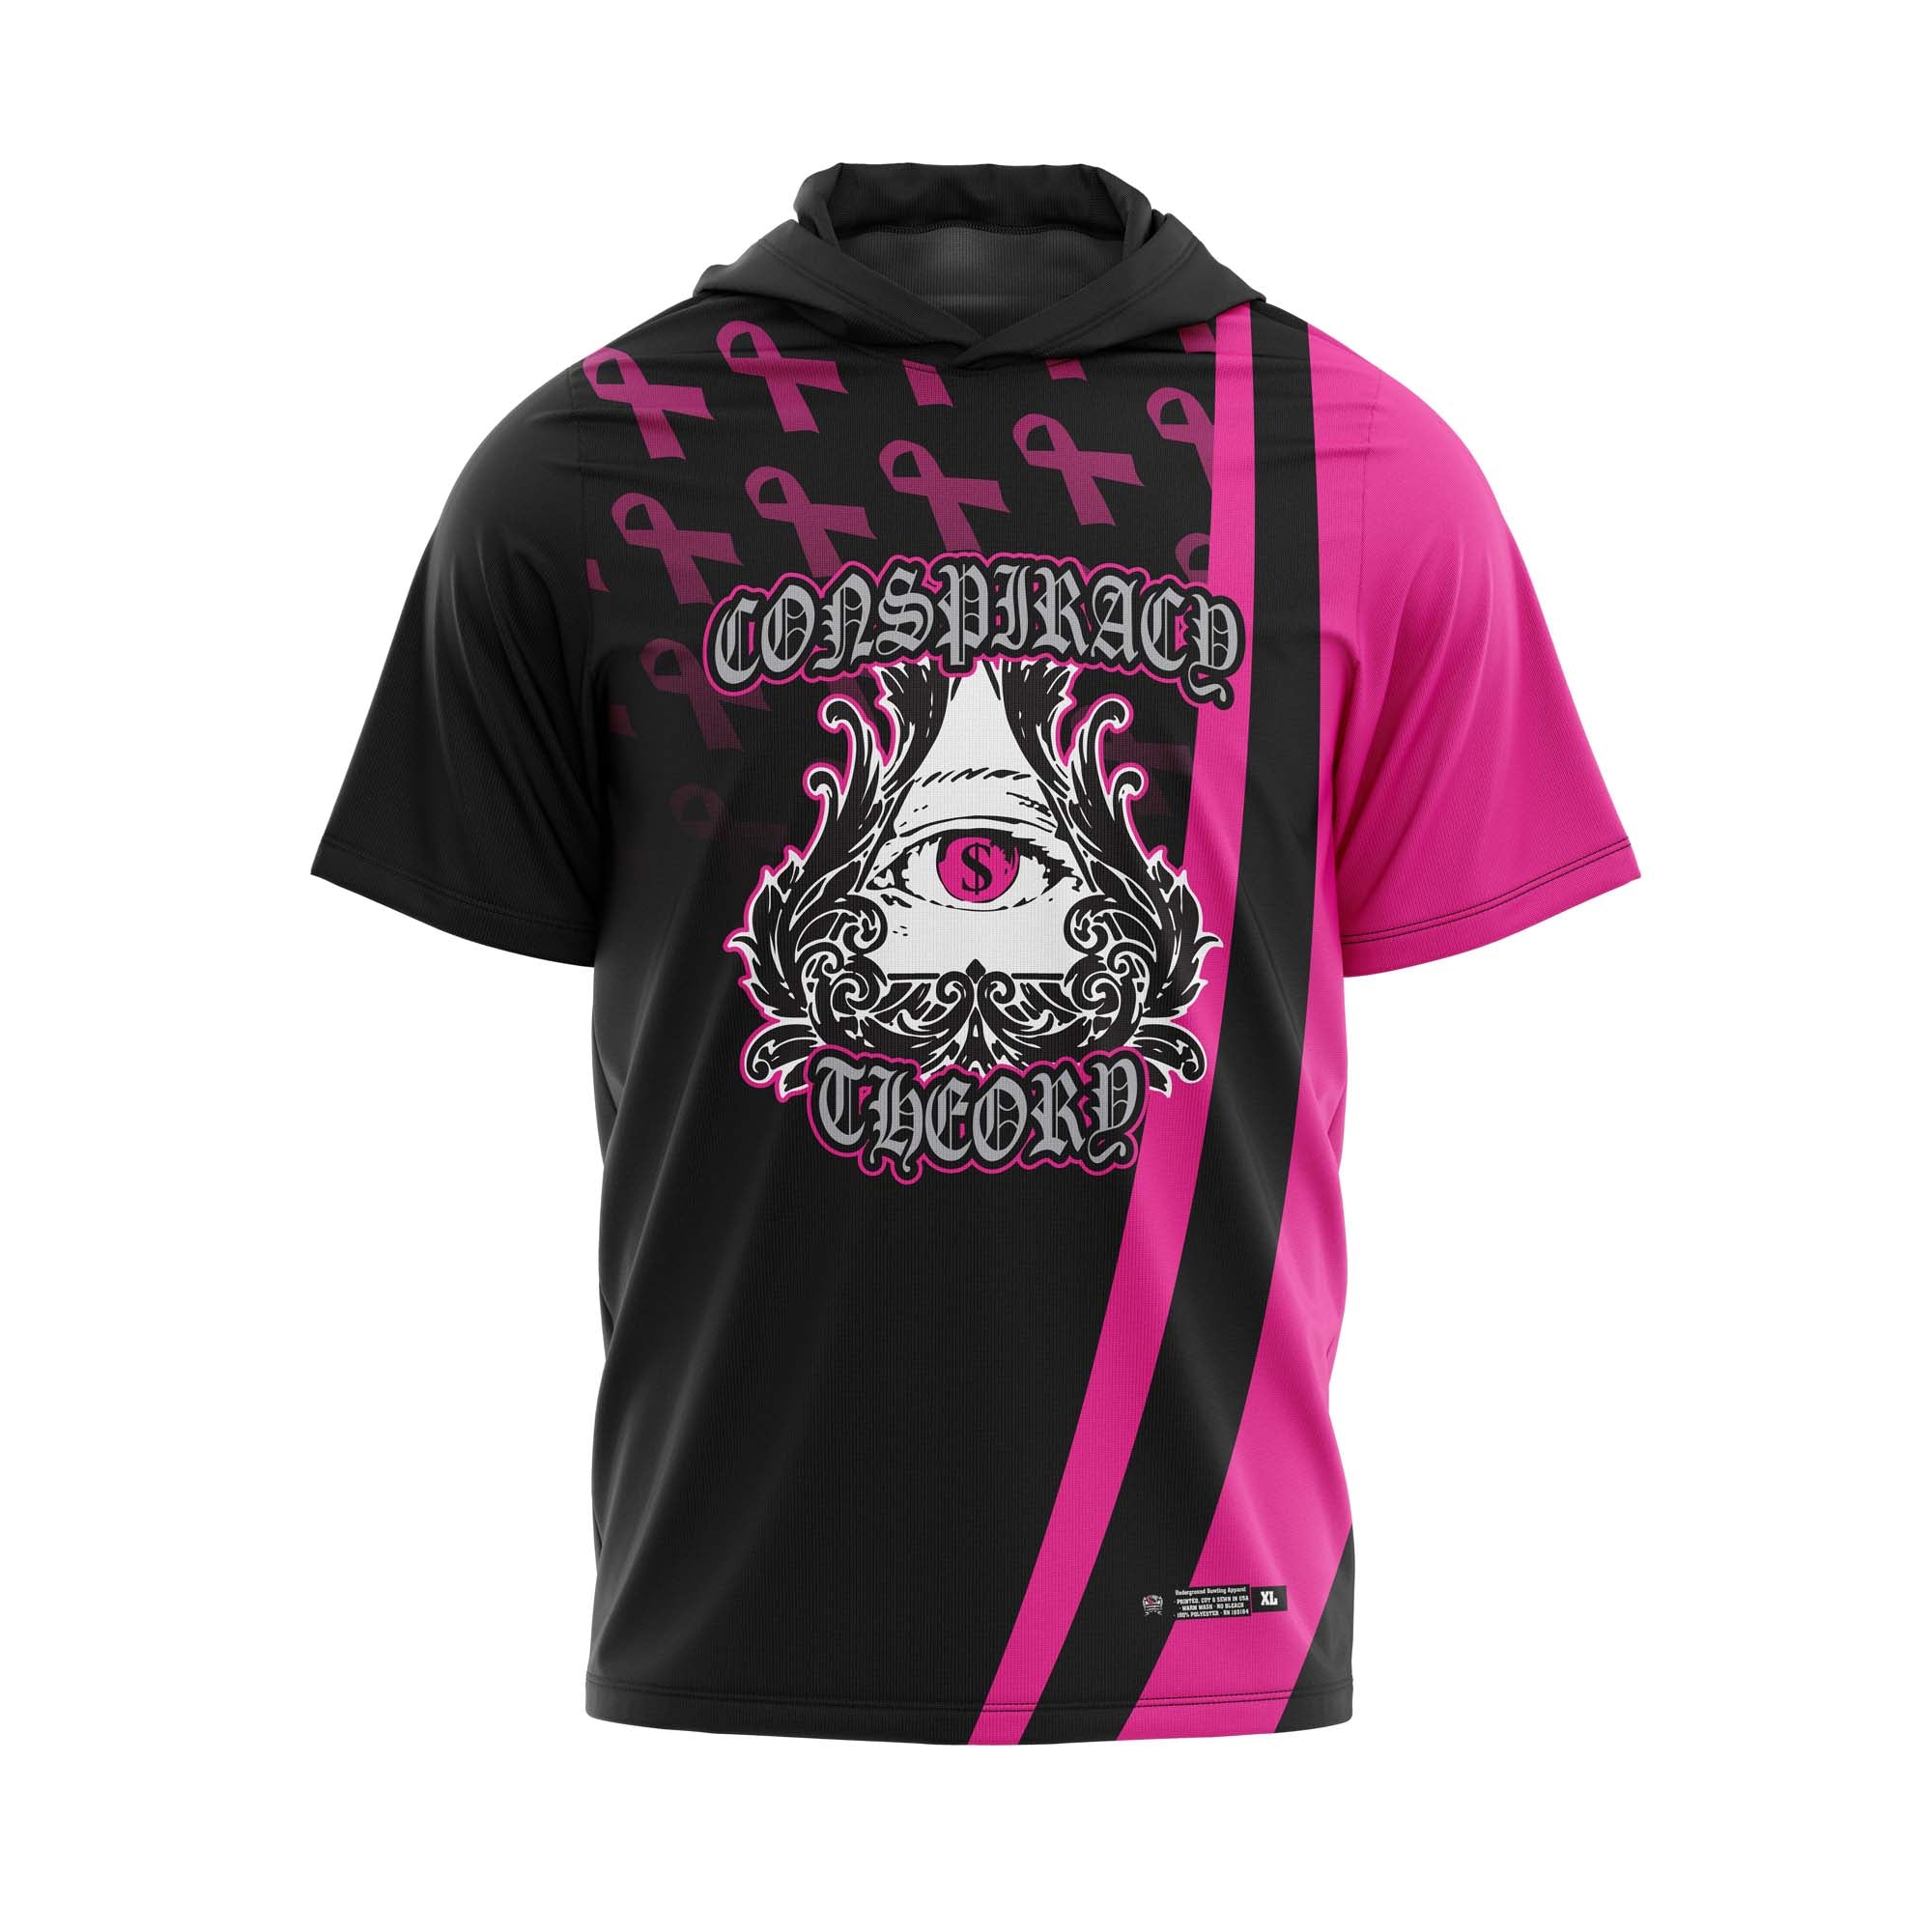 Conspiracy Theory Breast Cancer Jersey